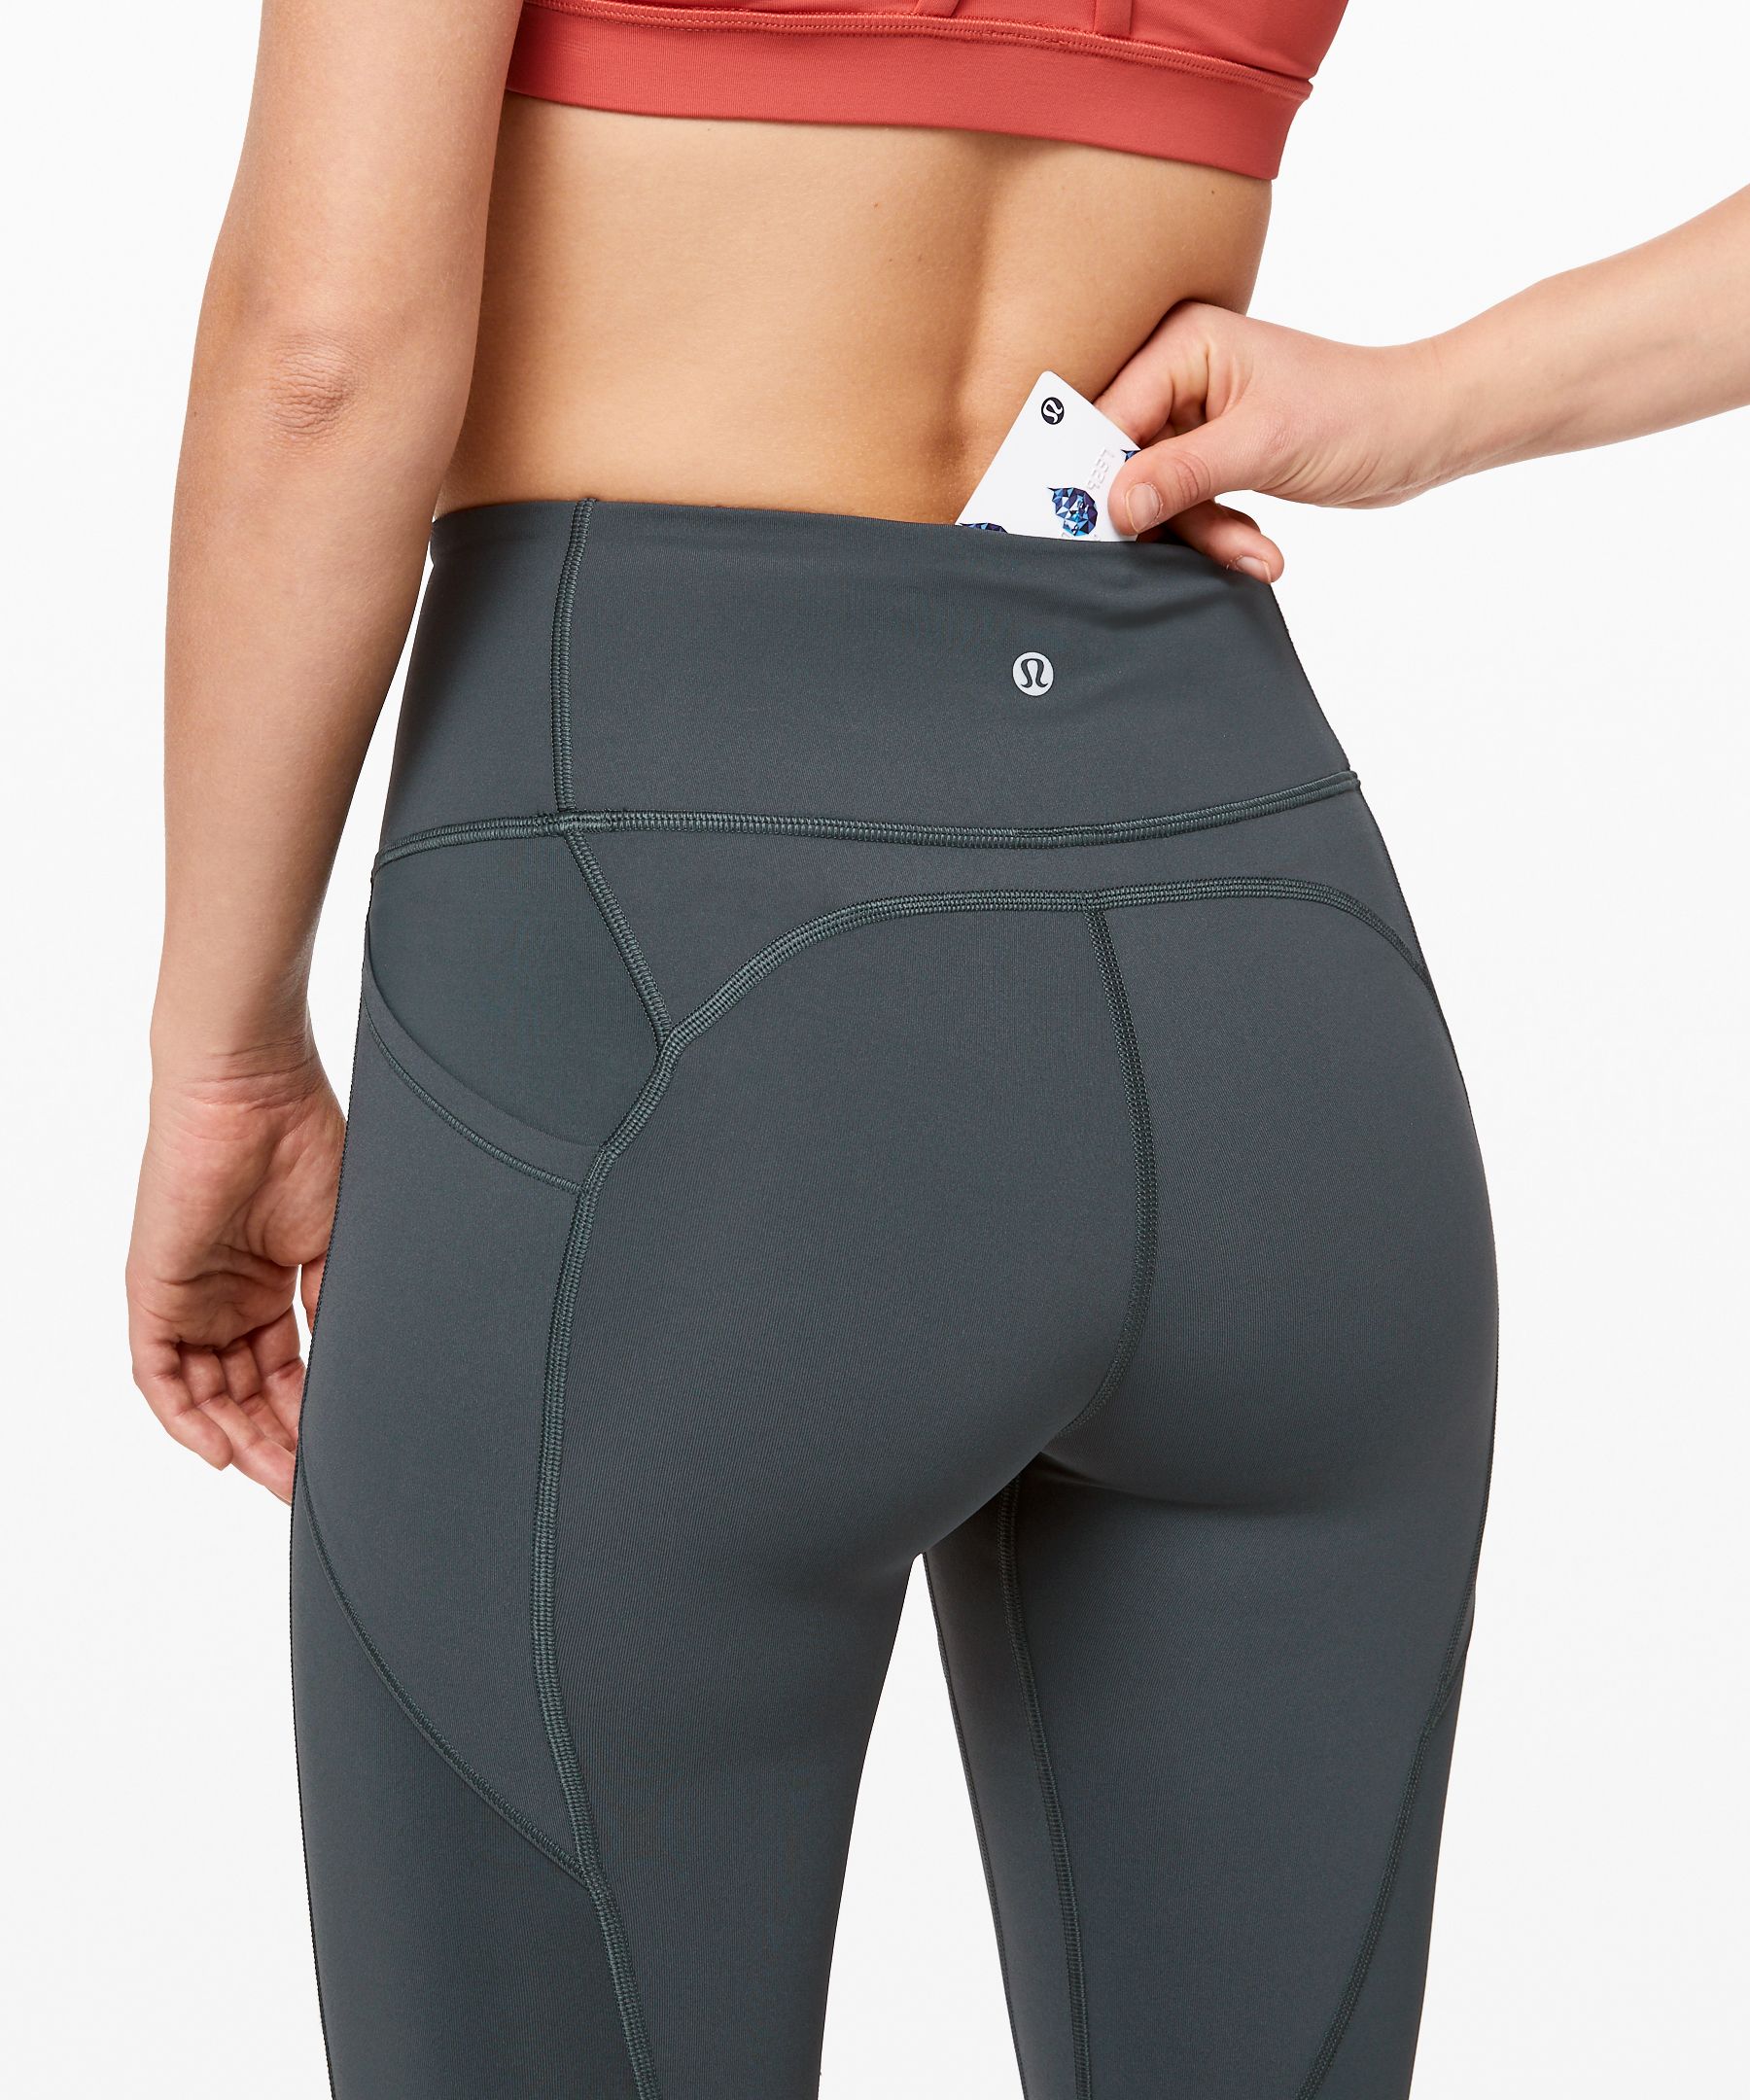 Lululemon All The Right Places Pant Ii 28 Usc